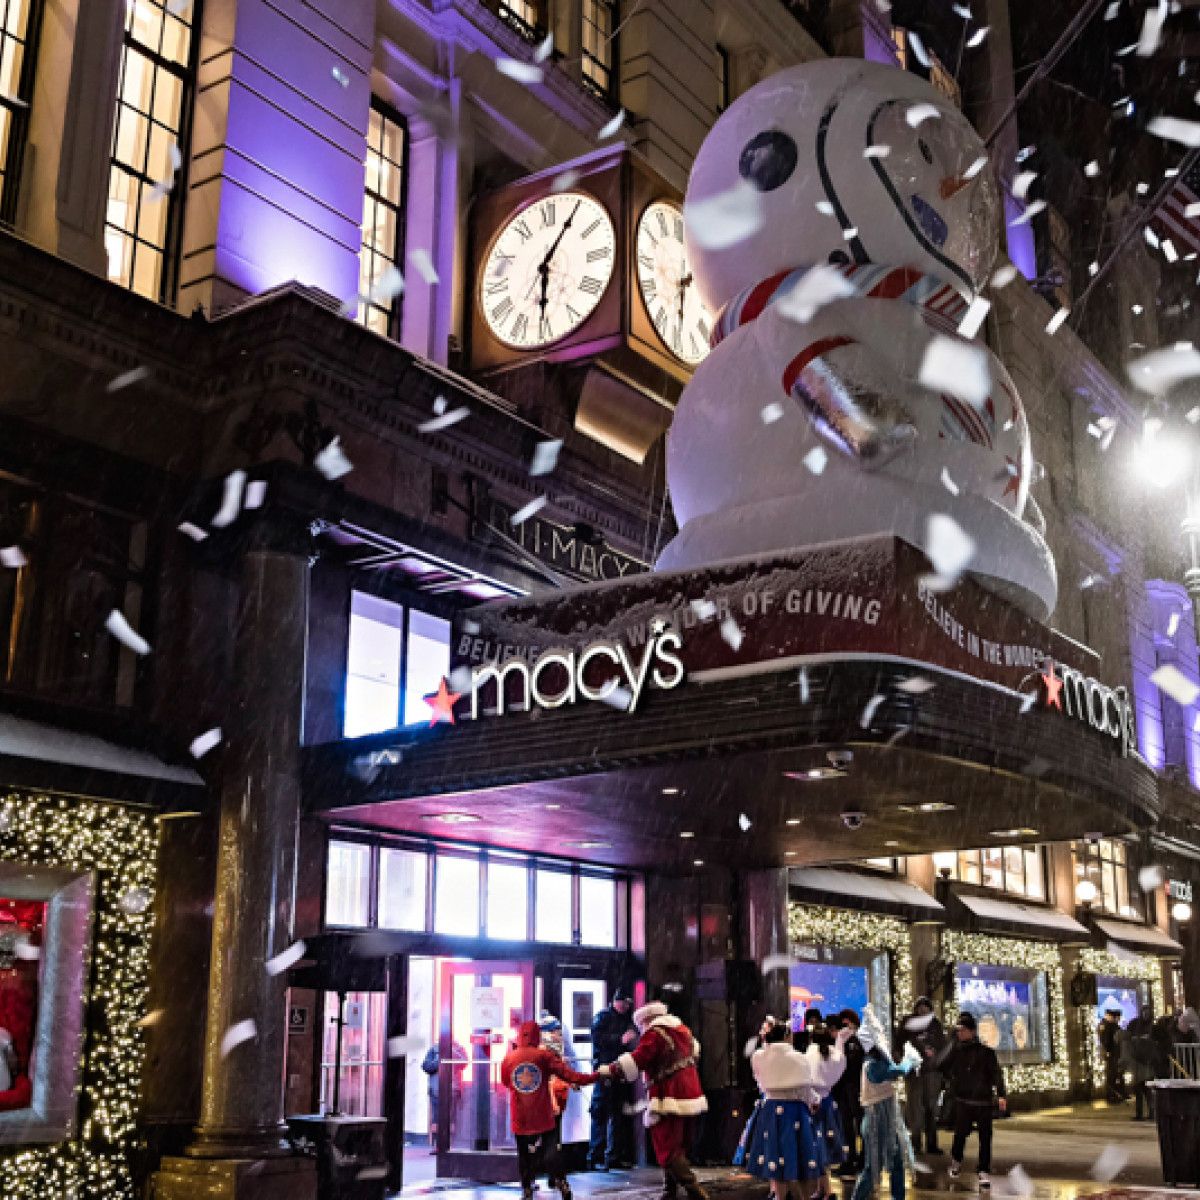 New York Today: History in a Holiday Window - The New York Times